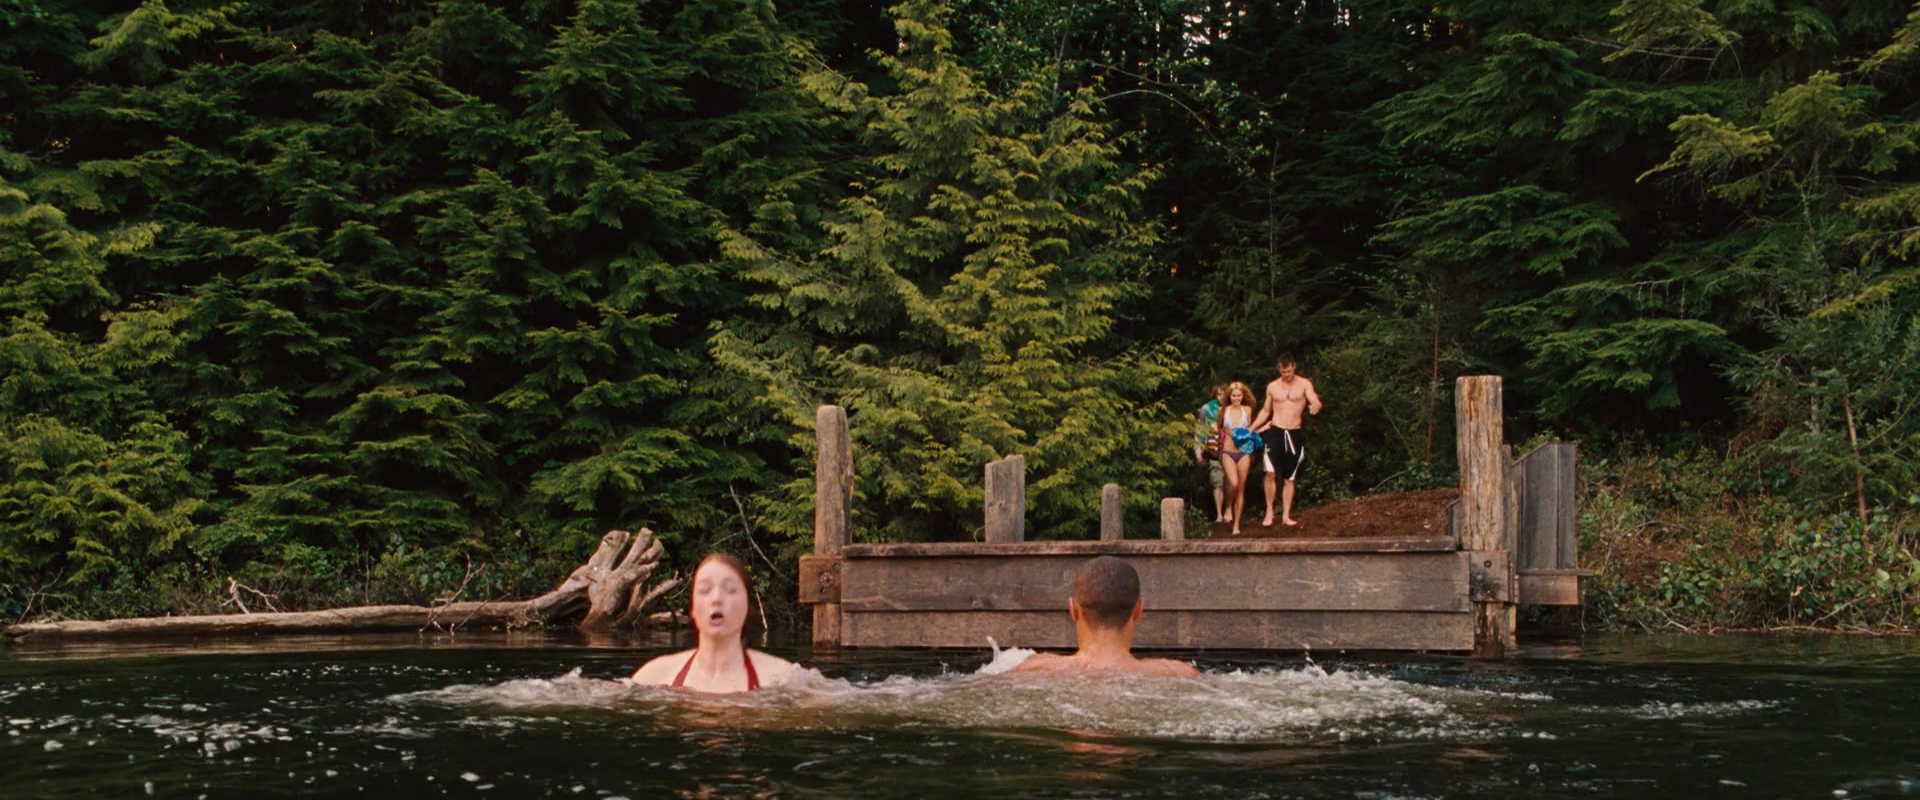 The Cabin In The Woods 2011 1080p BluRay x264-HDEX [PublicHD] preview 4